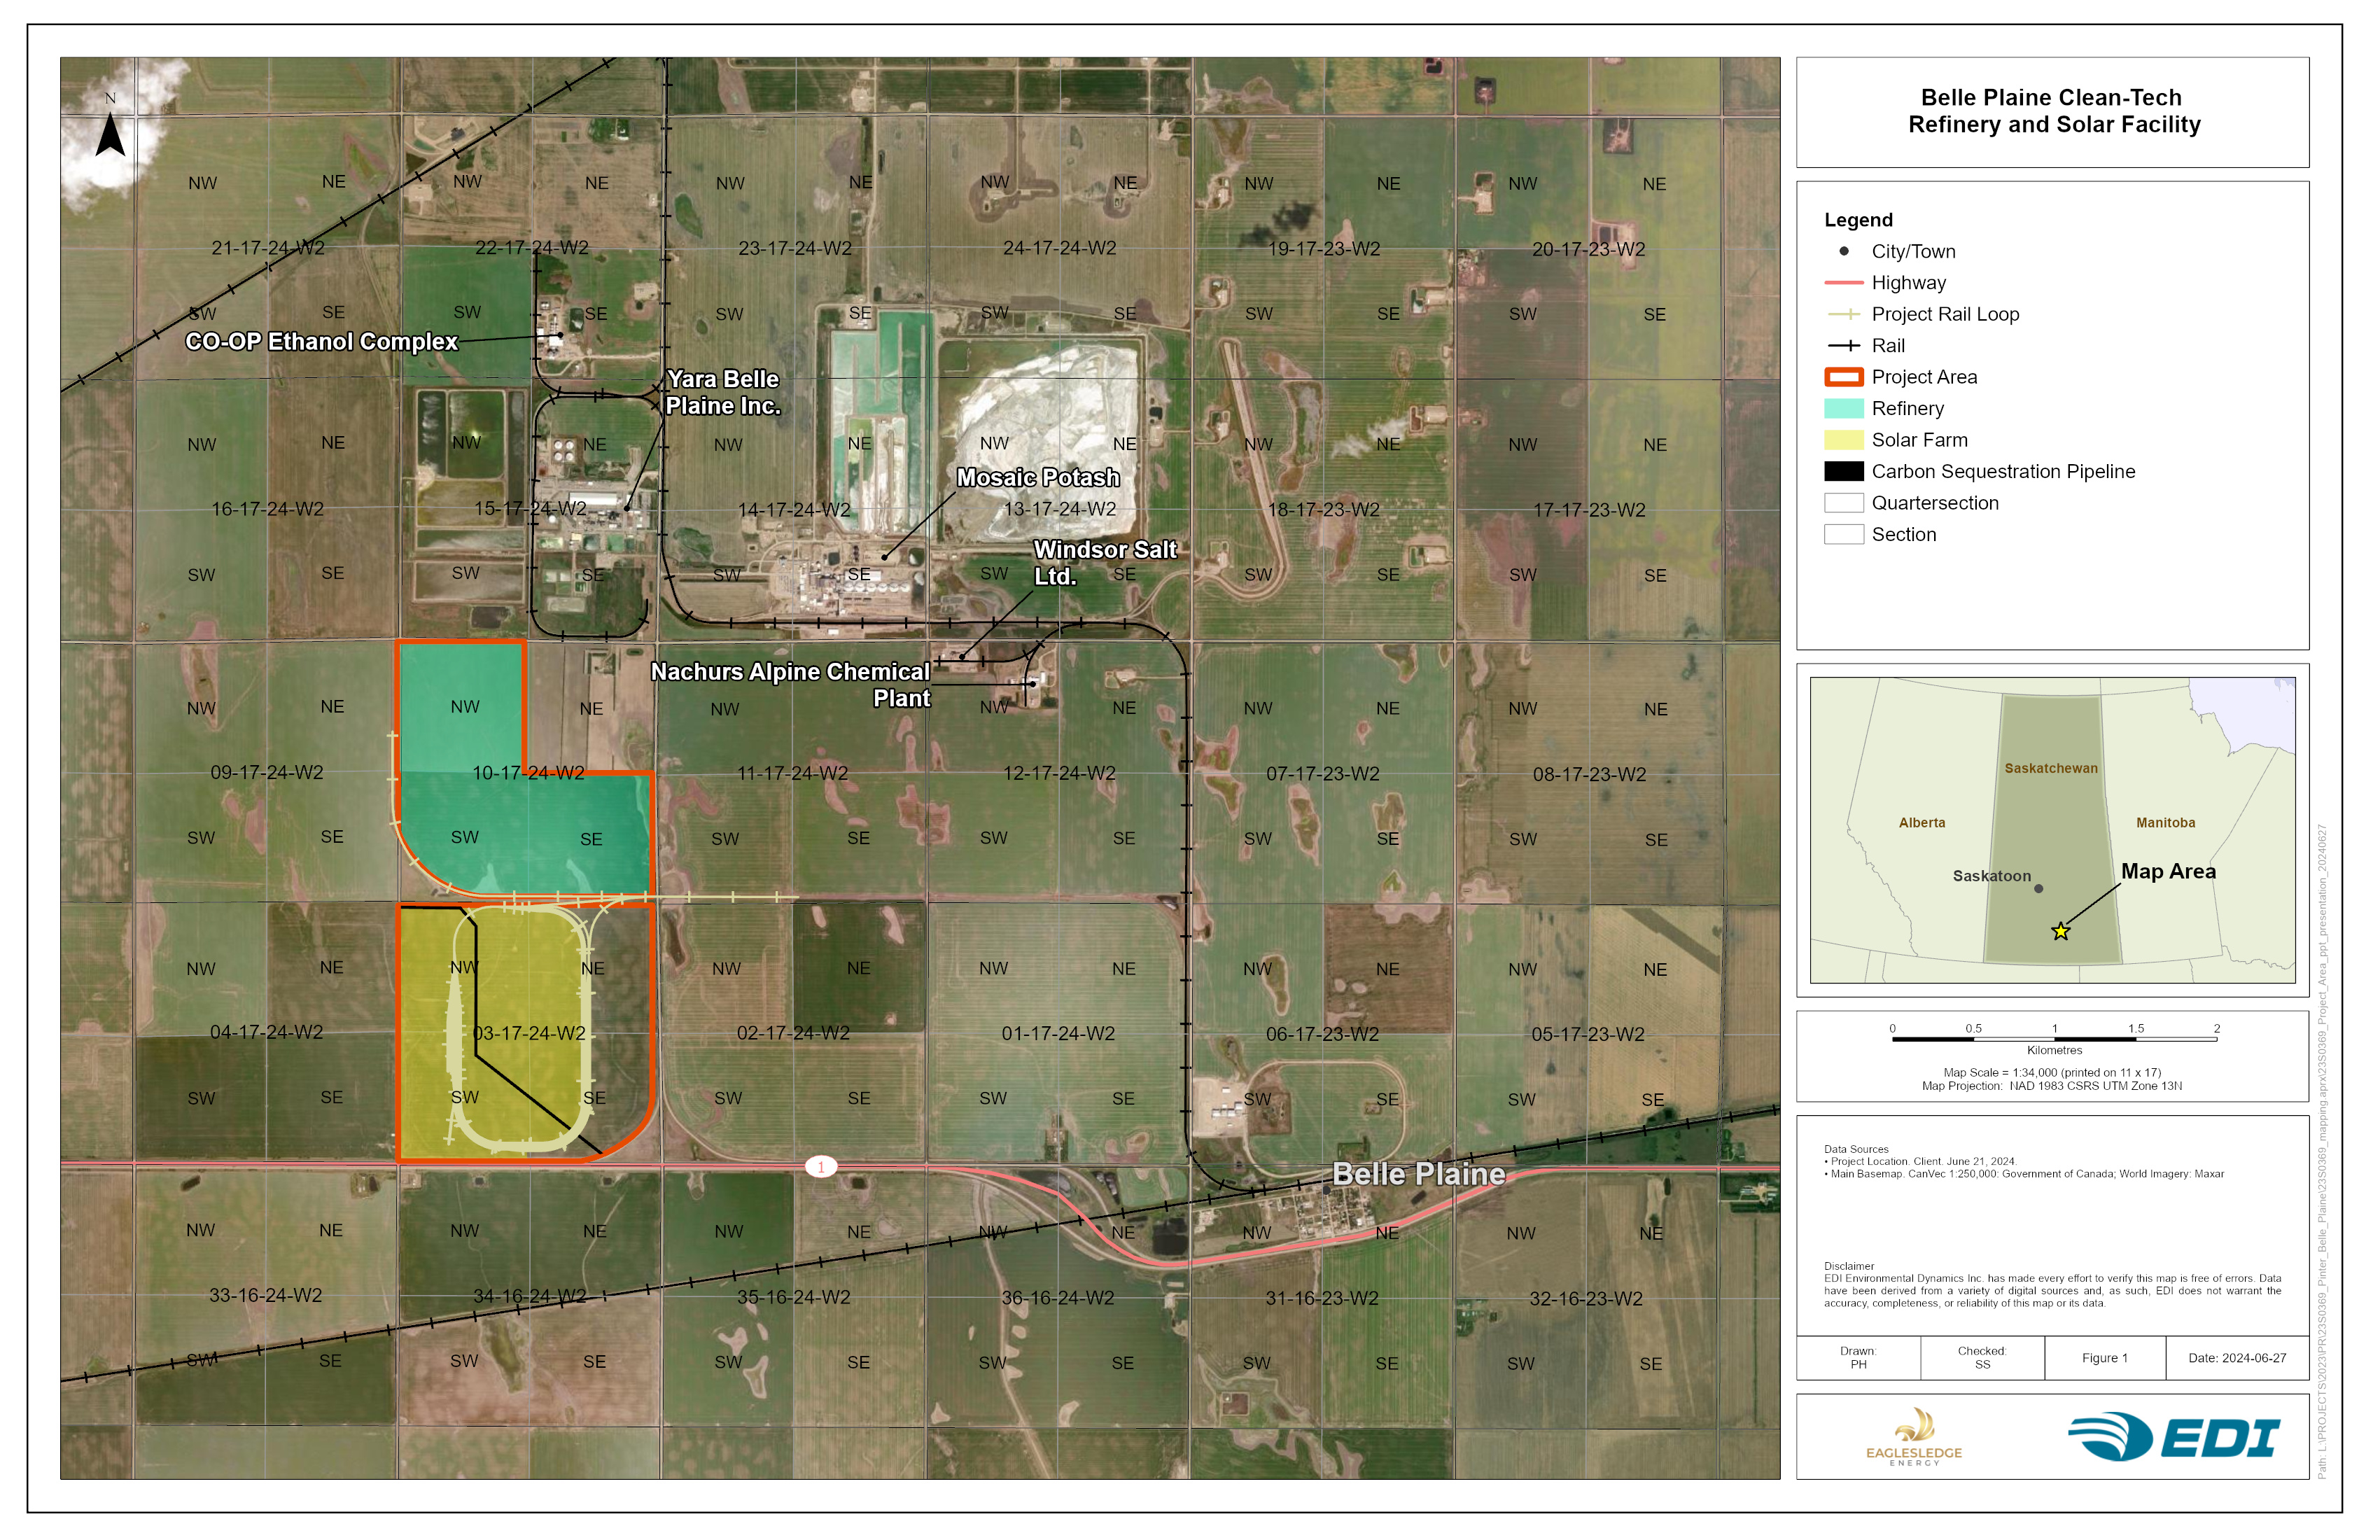 Satellite Sitemap for the Belle Plaine Clean-Tech Energy and Solar Facility